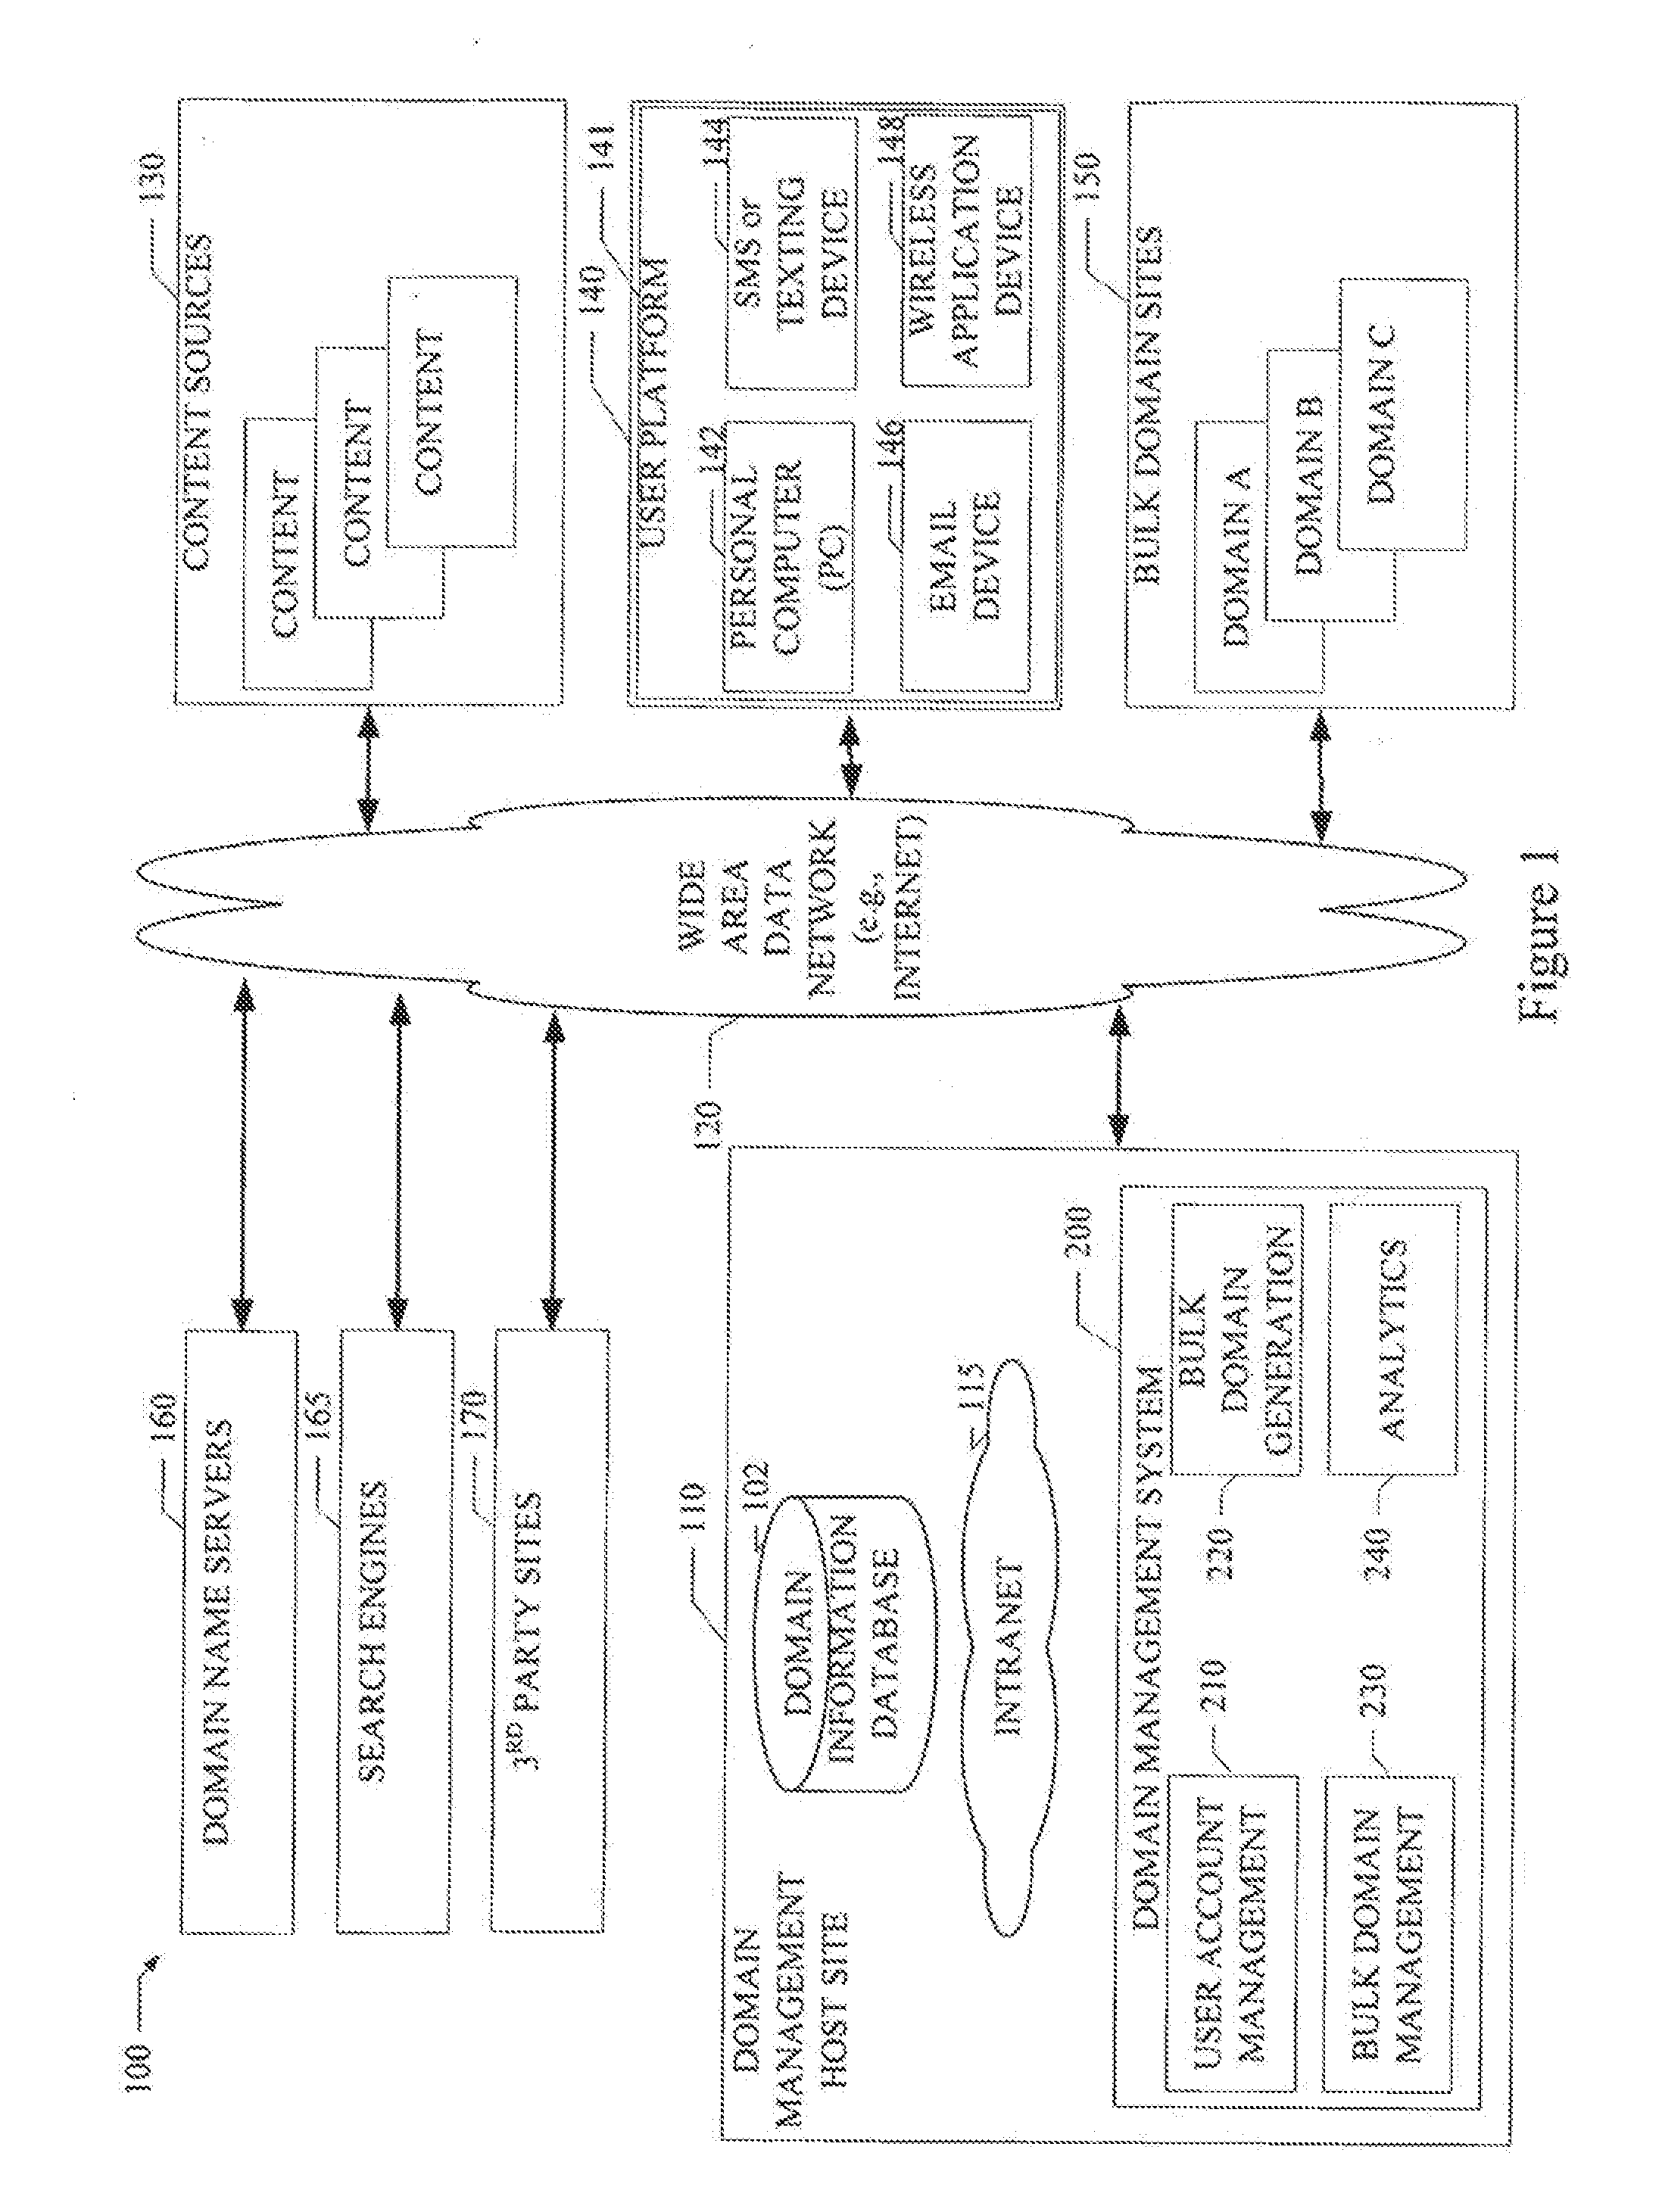 System and Method for Bulk Web Domain Generation and Management